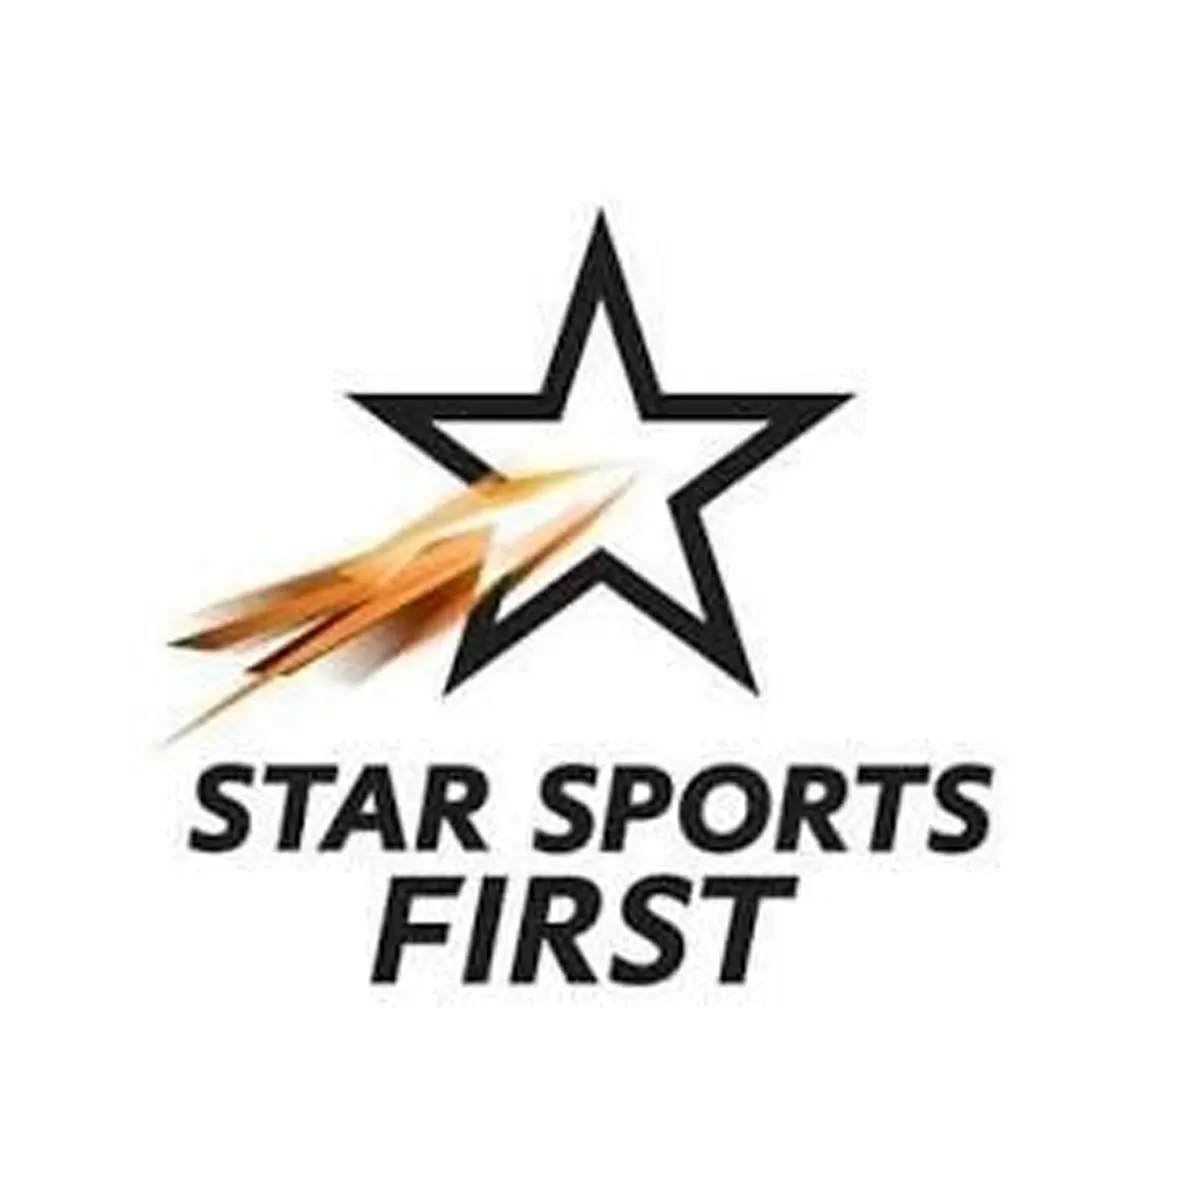 Television Media Star Sports First Advertising in India